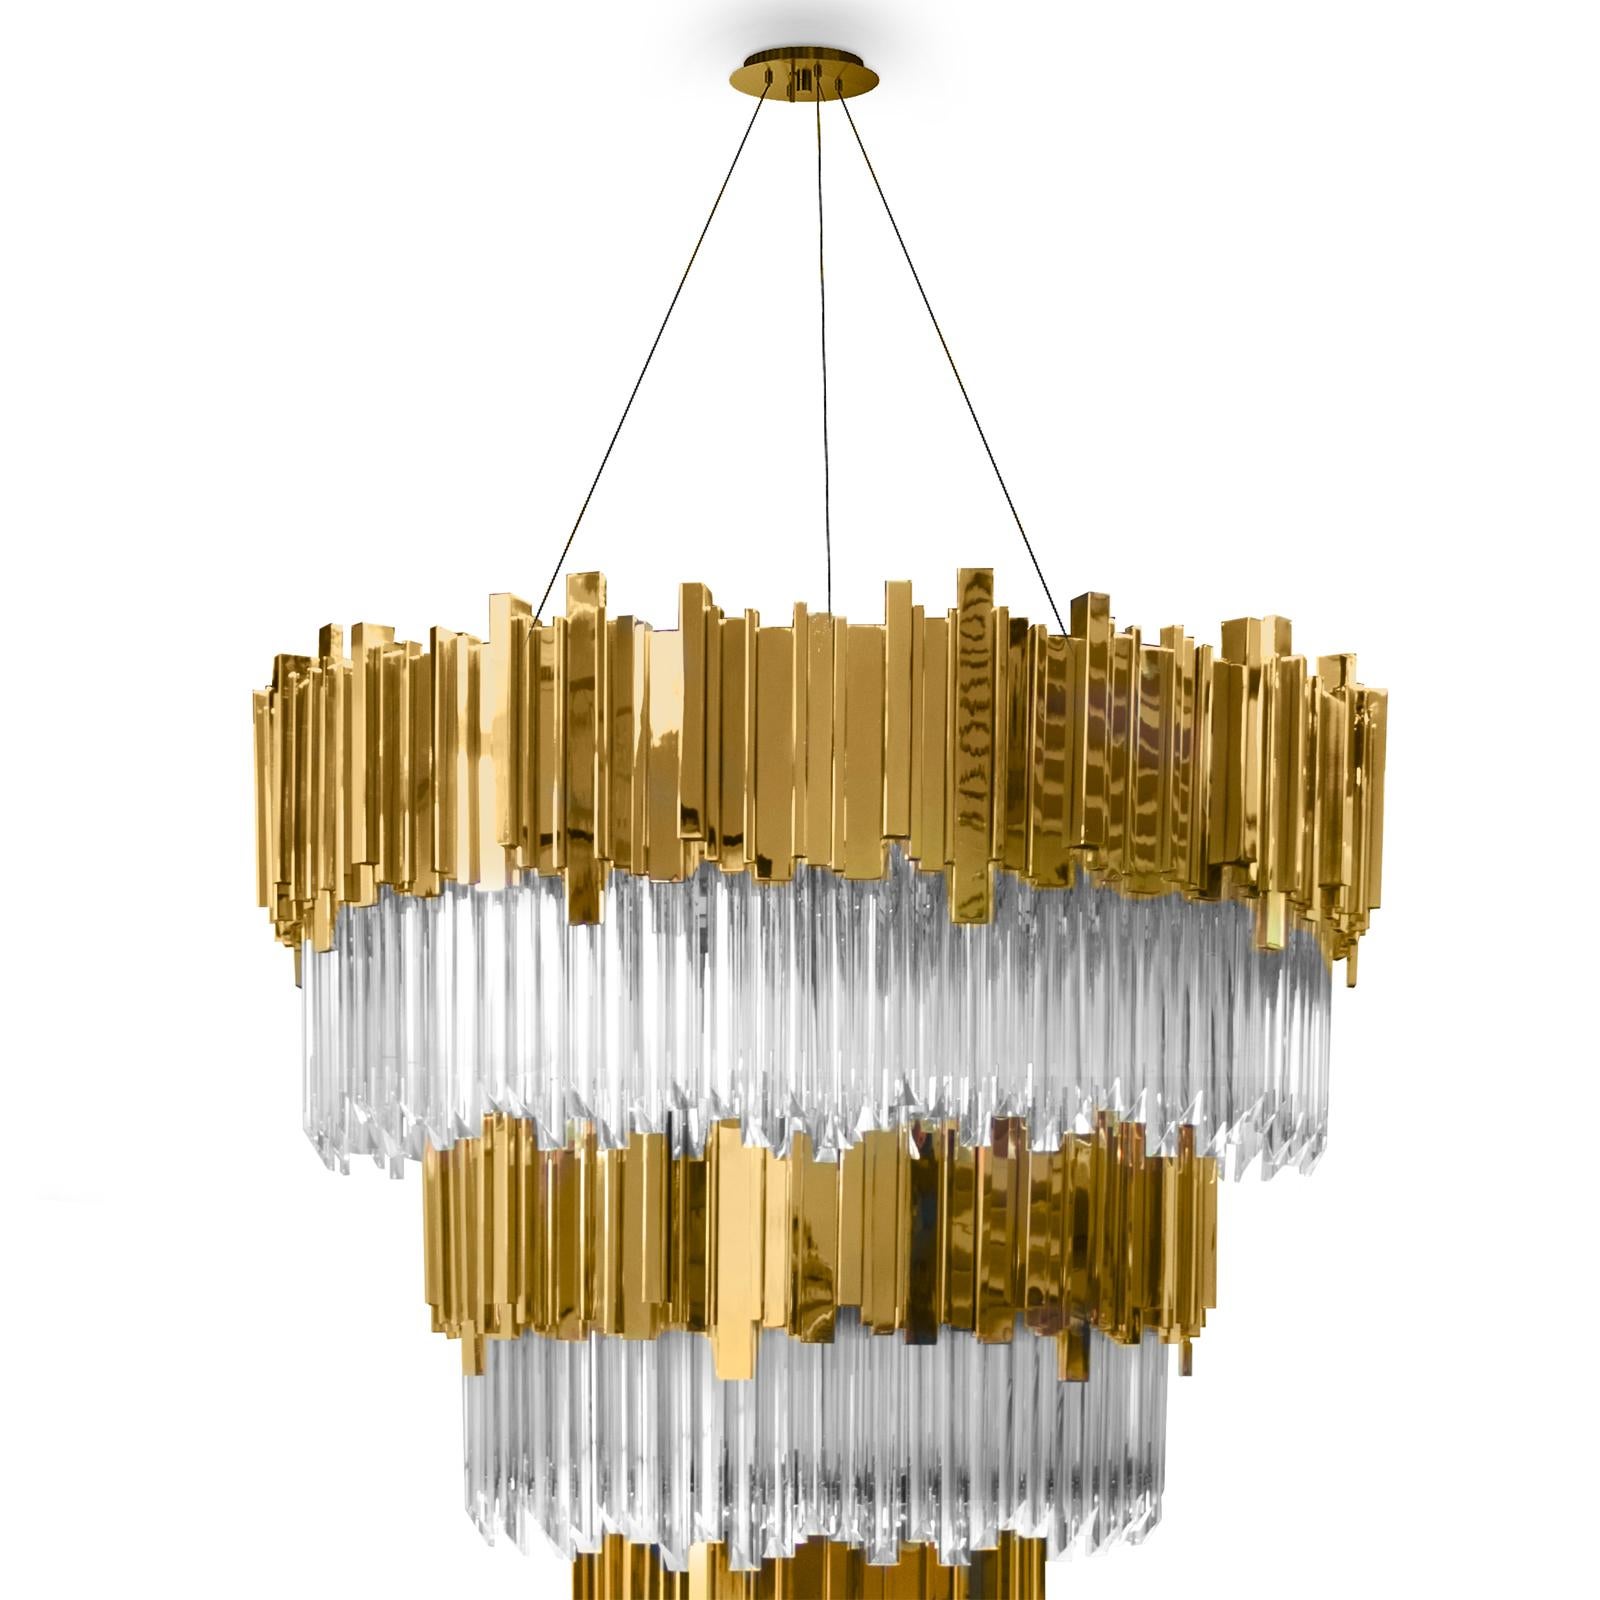 Chandelier Ambassador with crystal glass pendants.
With four circular rows of gold plated polished brass
rectangular sticks. With 75 bulbs, lamp holder type G9.
20 Watt max, for 220-240V. Bulbs not included.
With steel ropes for hanging: 200cm